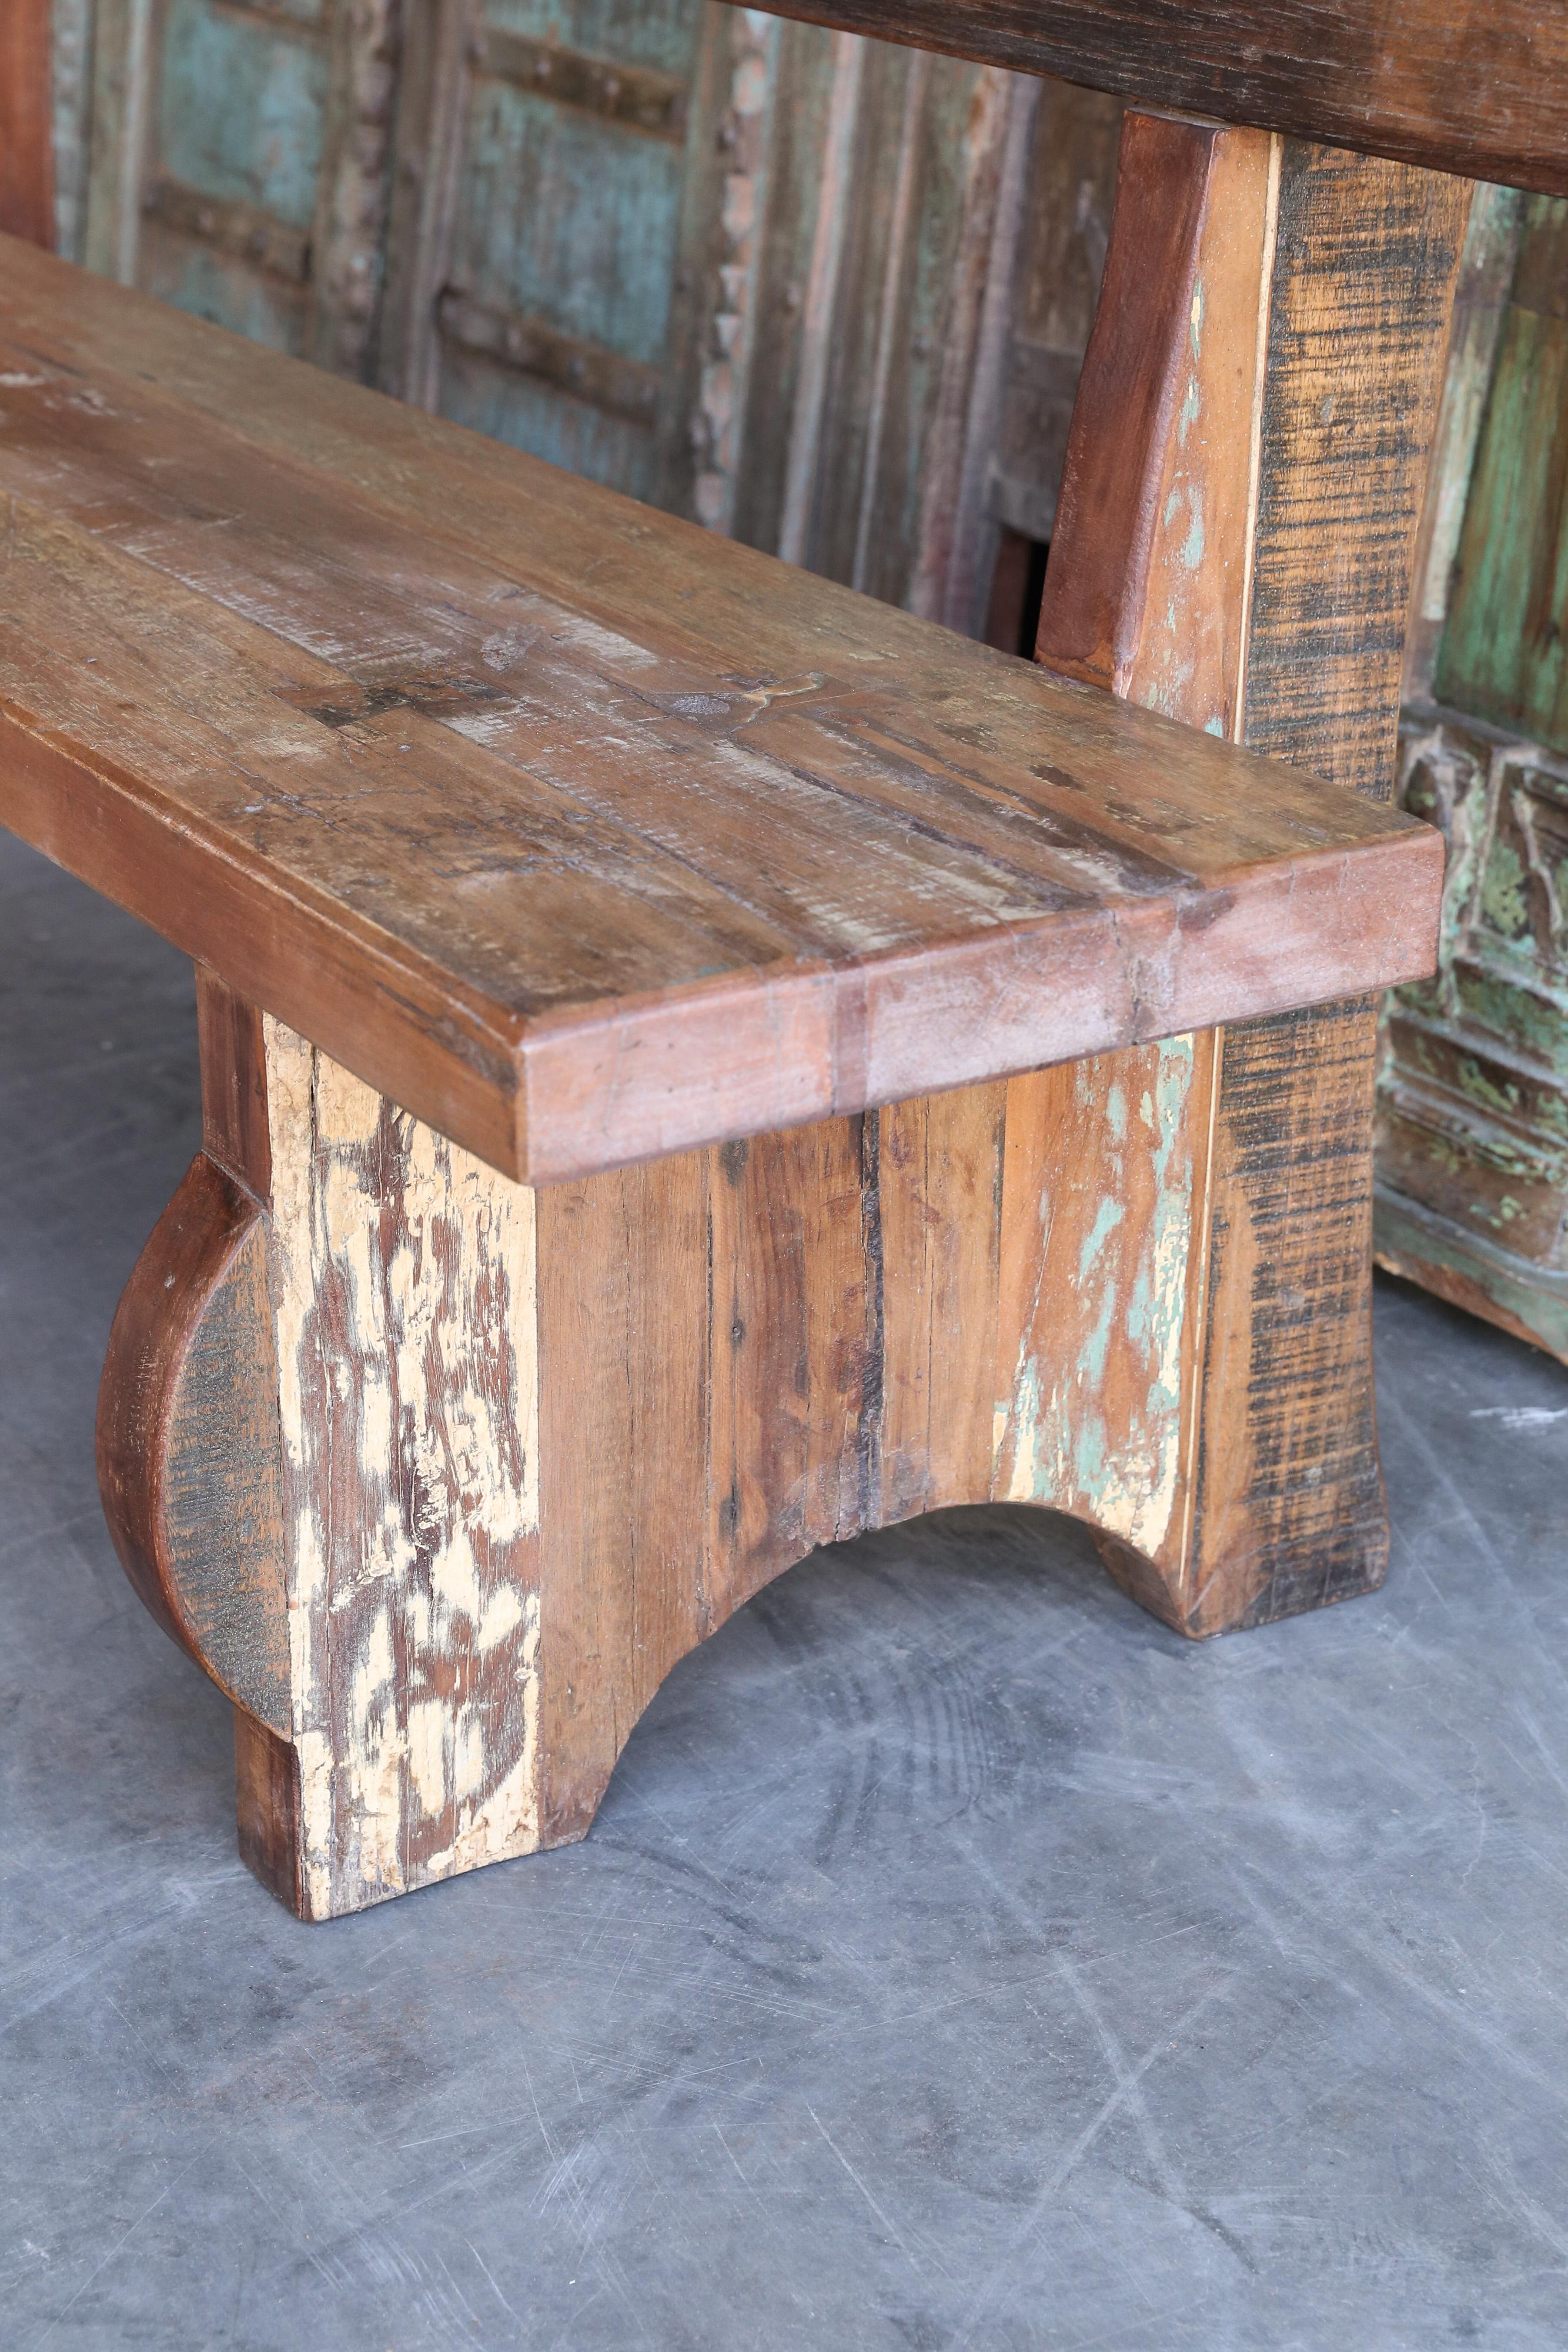 This elegant robust garden bench with back support comes from a tea plantation in the Himalayan slope. You can see the way the bench is put together by old fashioned butterfly joints and by old world carpentry. It is heavily made to last several